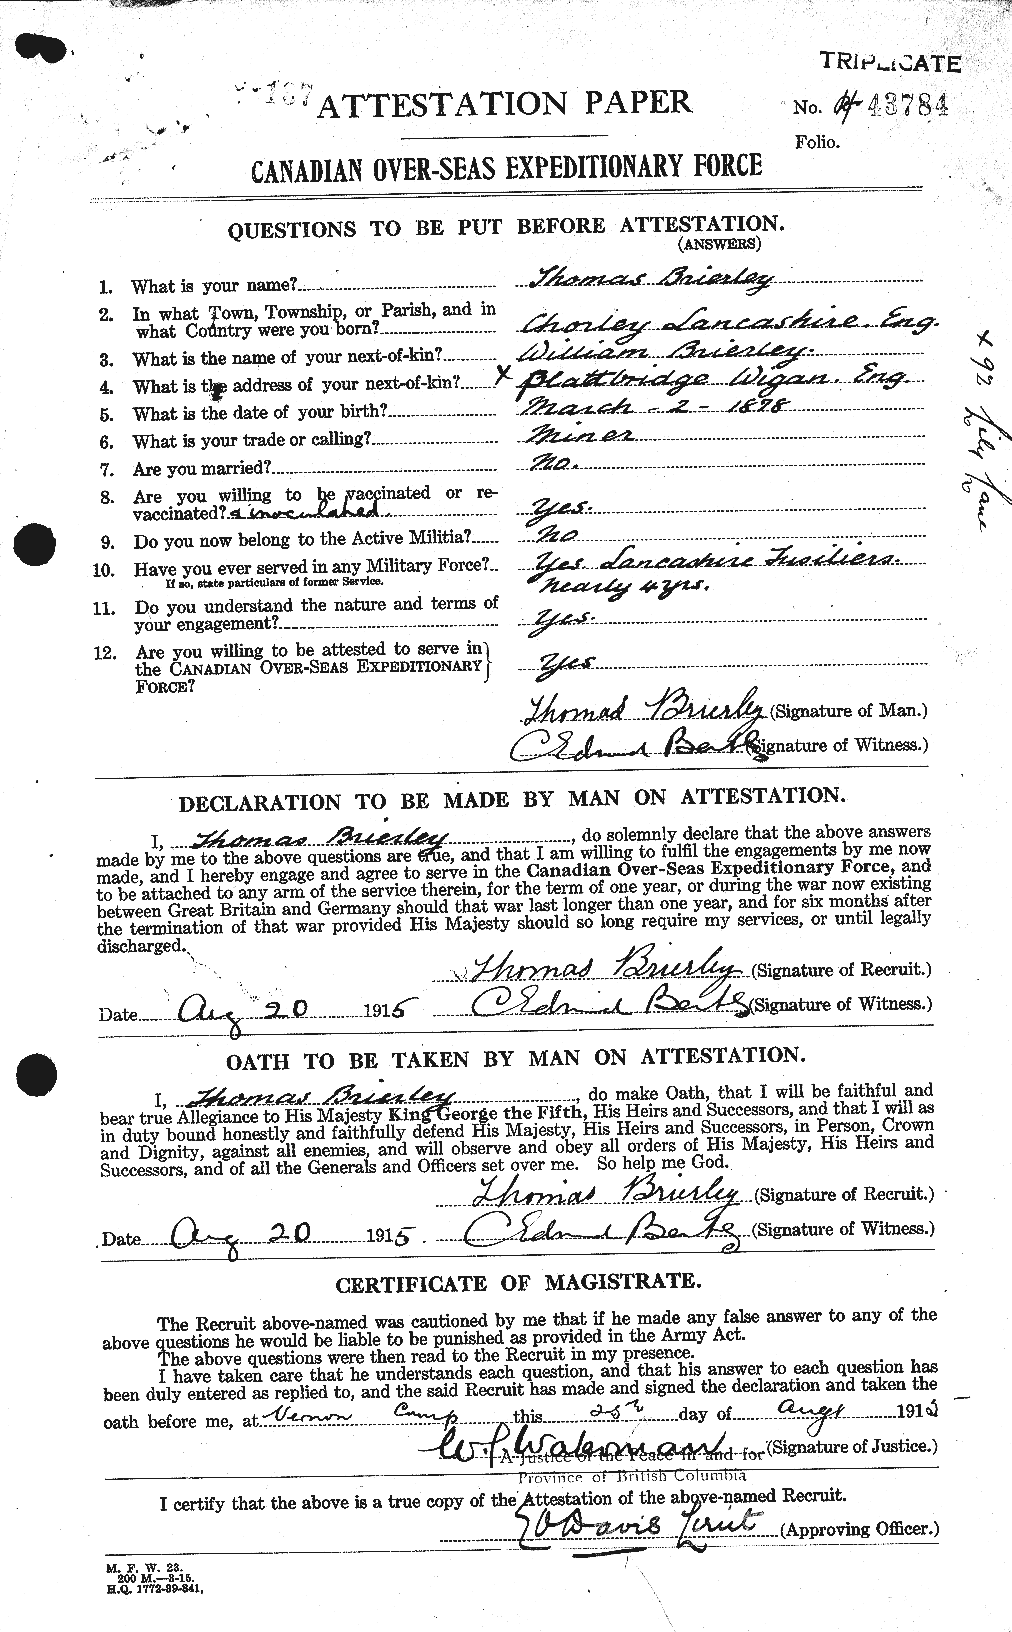 Personnel Records of the First World War - CEF 260018a